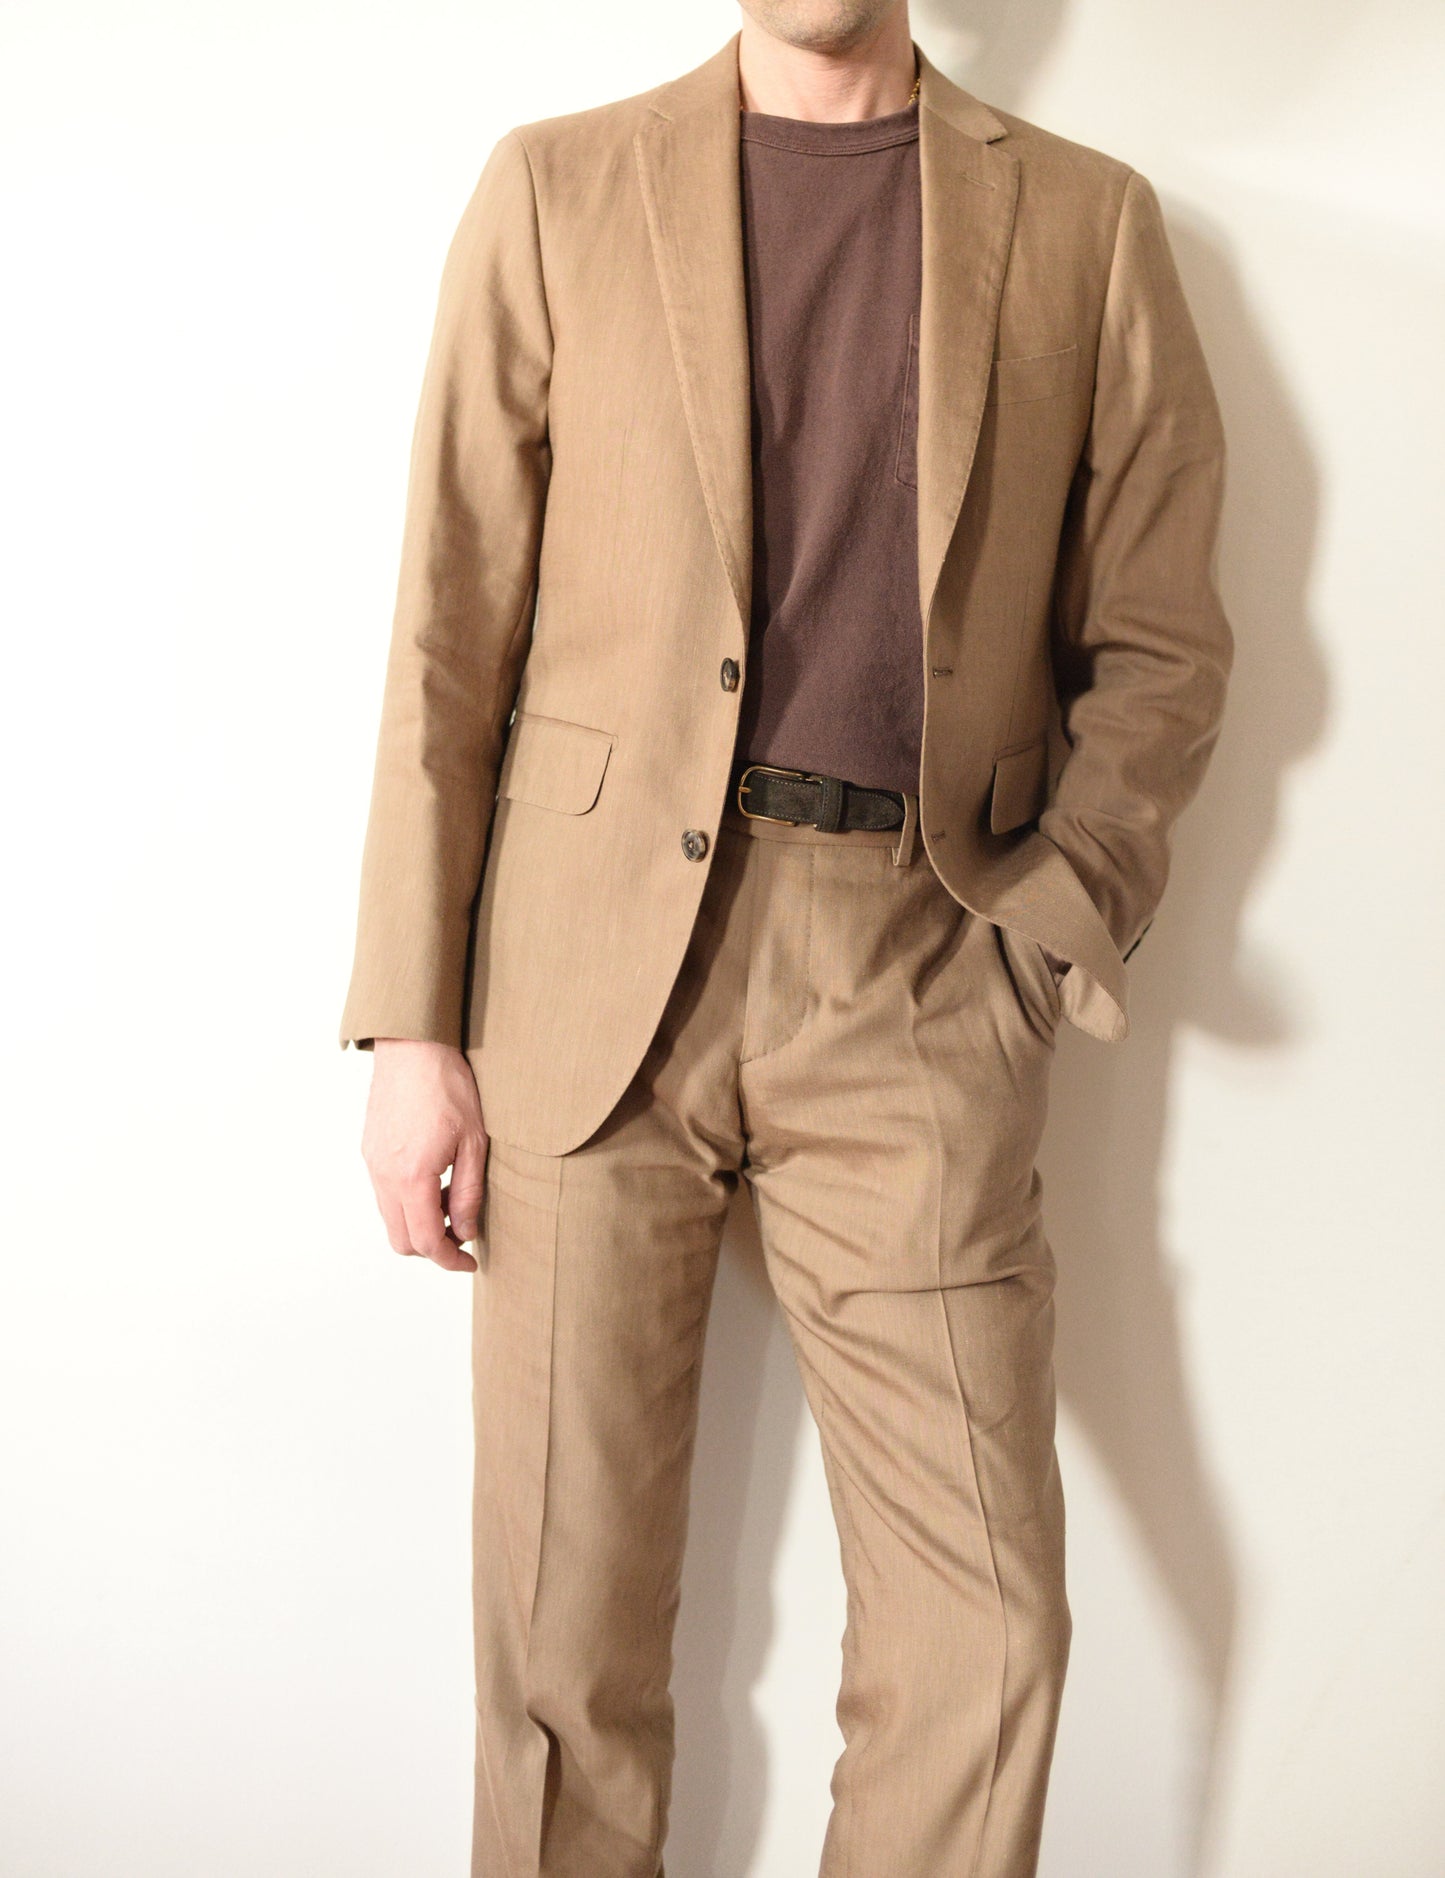 Brooklyn Tailors BKT50 Tailored Trousers in Wool Linen - Sahara on-body shot. Model is wearing trousers with matching jacket, brown t-shirt and brown belt